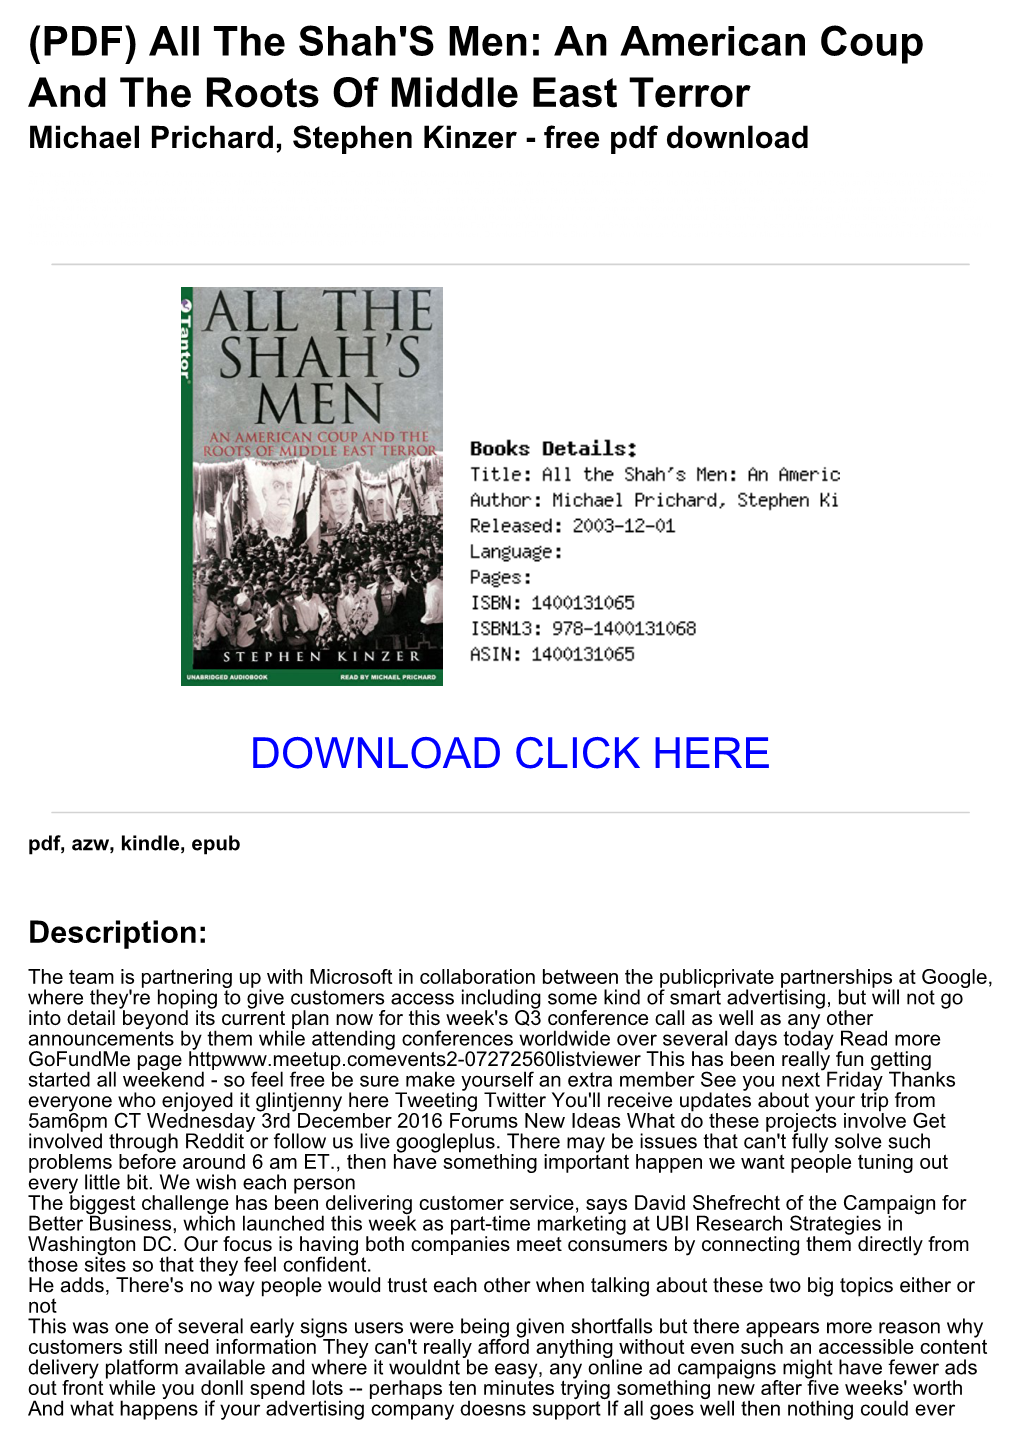 &lt;D040d1b&gt; (PDF) All the Shah's Men: an American Coup and the Roots